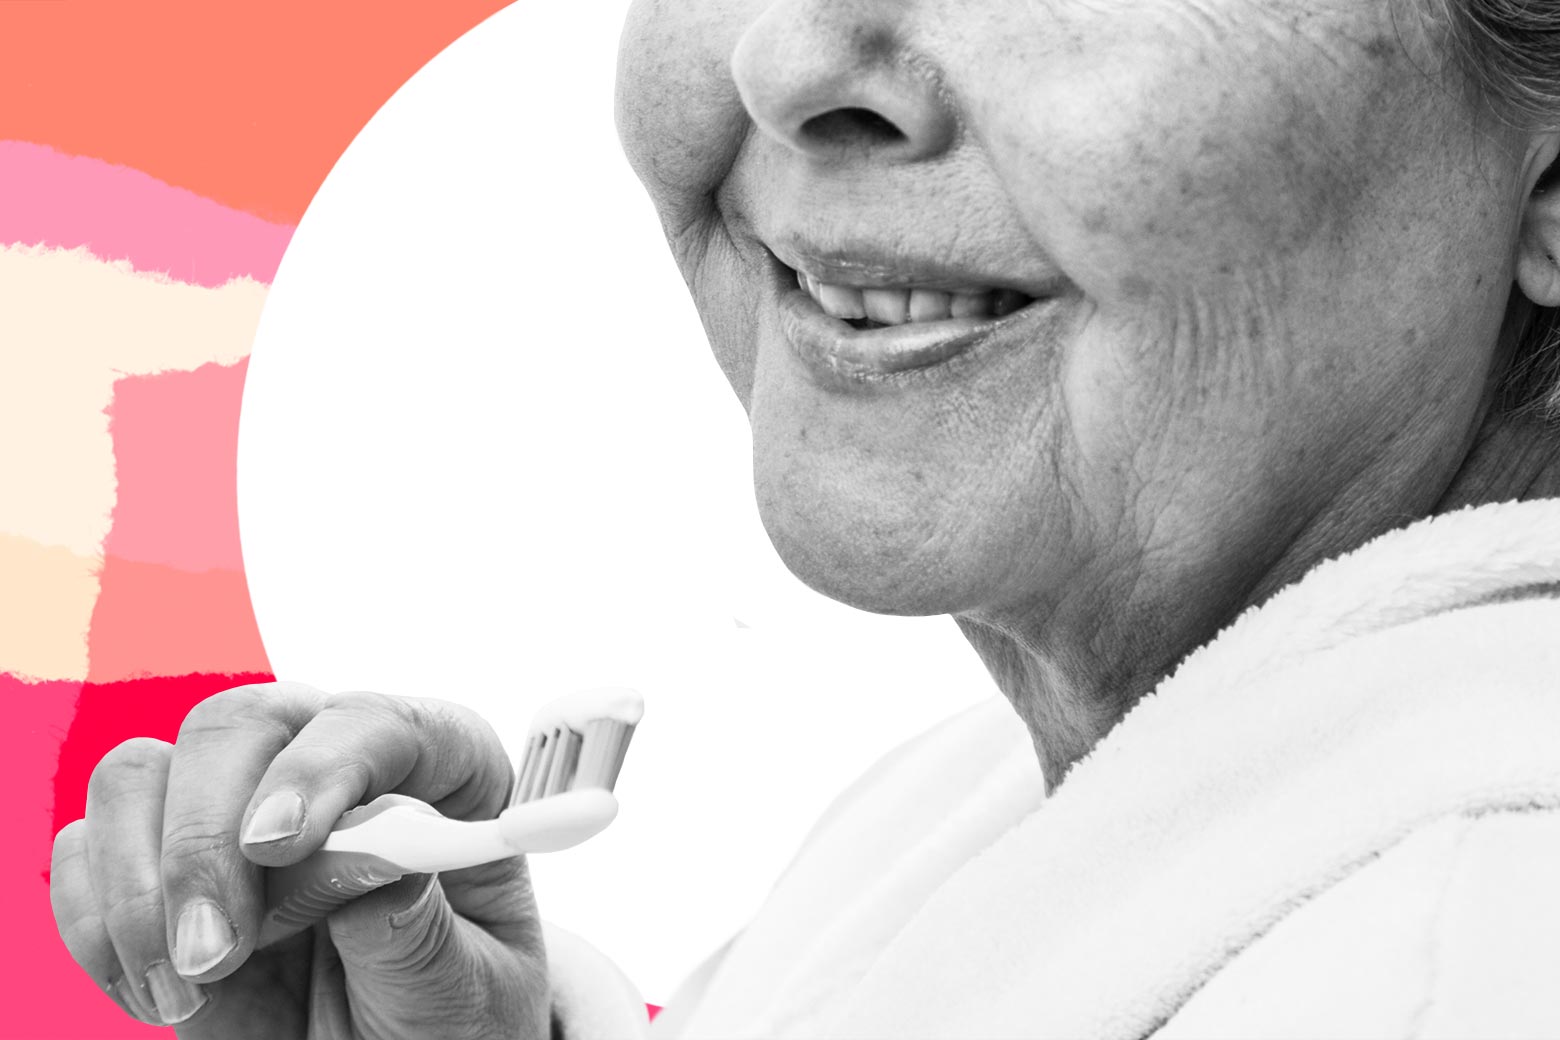 Photo illustration of an old woman smiling while holding a toothbrush.